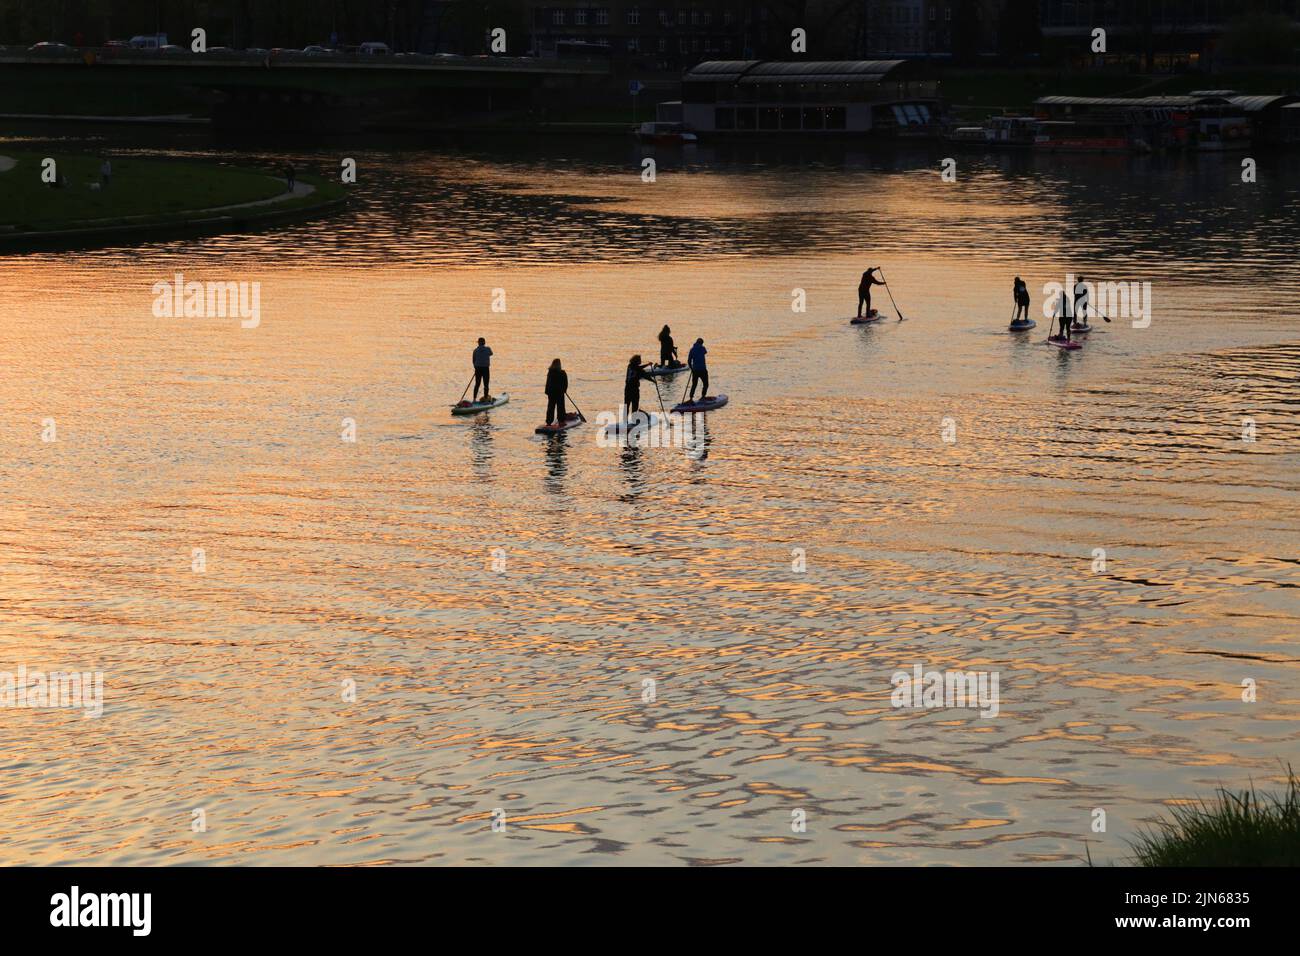 Cracow. Krakow. Poland. Silhouettes of people sailing SUP boards on the river in the sunset light. Stock Photo